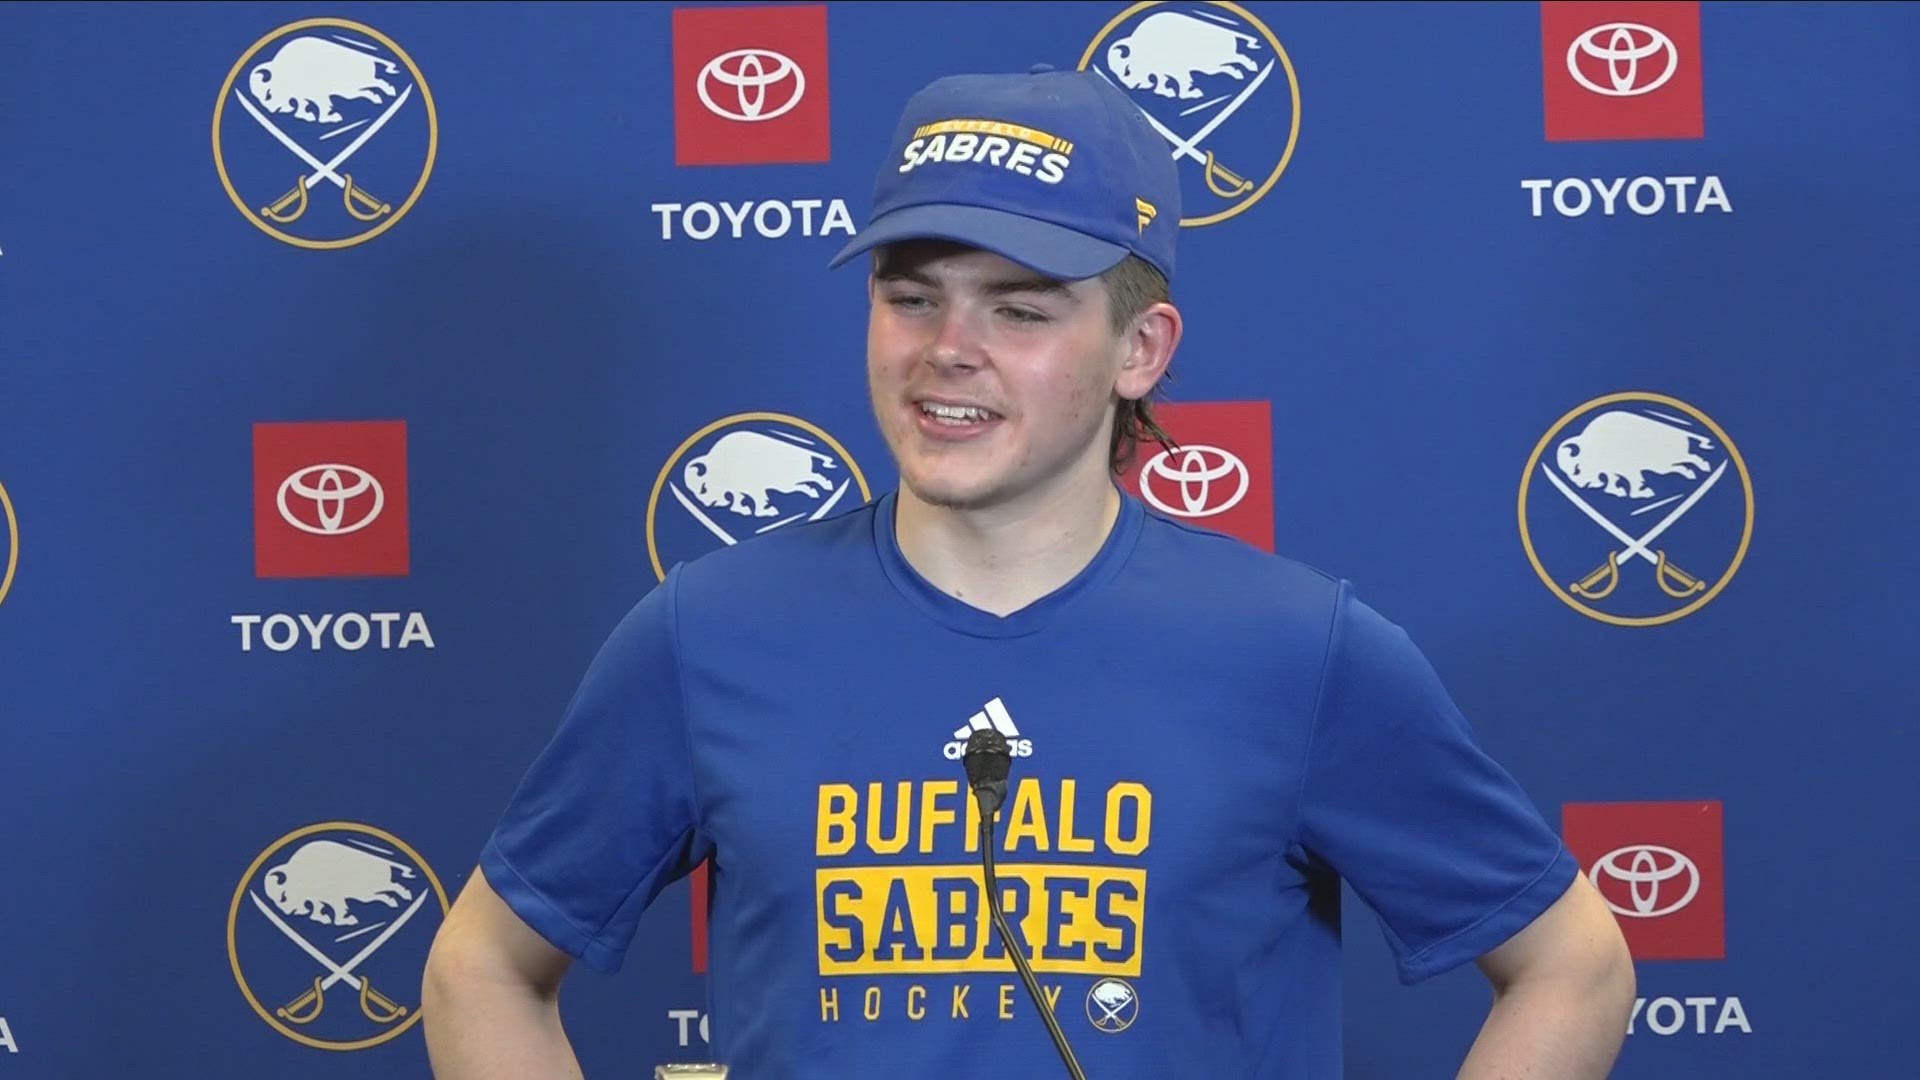 The camp allowed the team's prospects to grow and learn on the ice just as much as they learned outside of the rink about the organization and City of Buffalo.